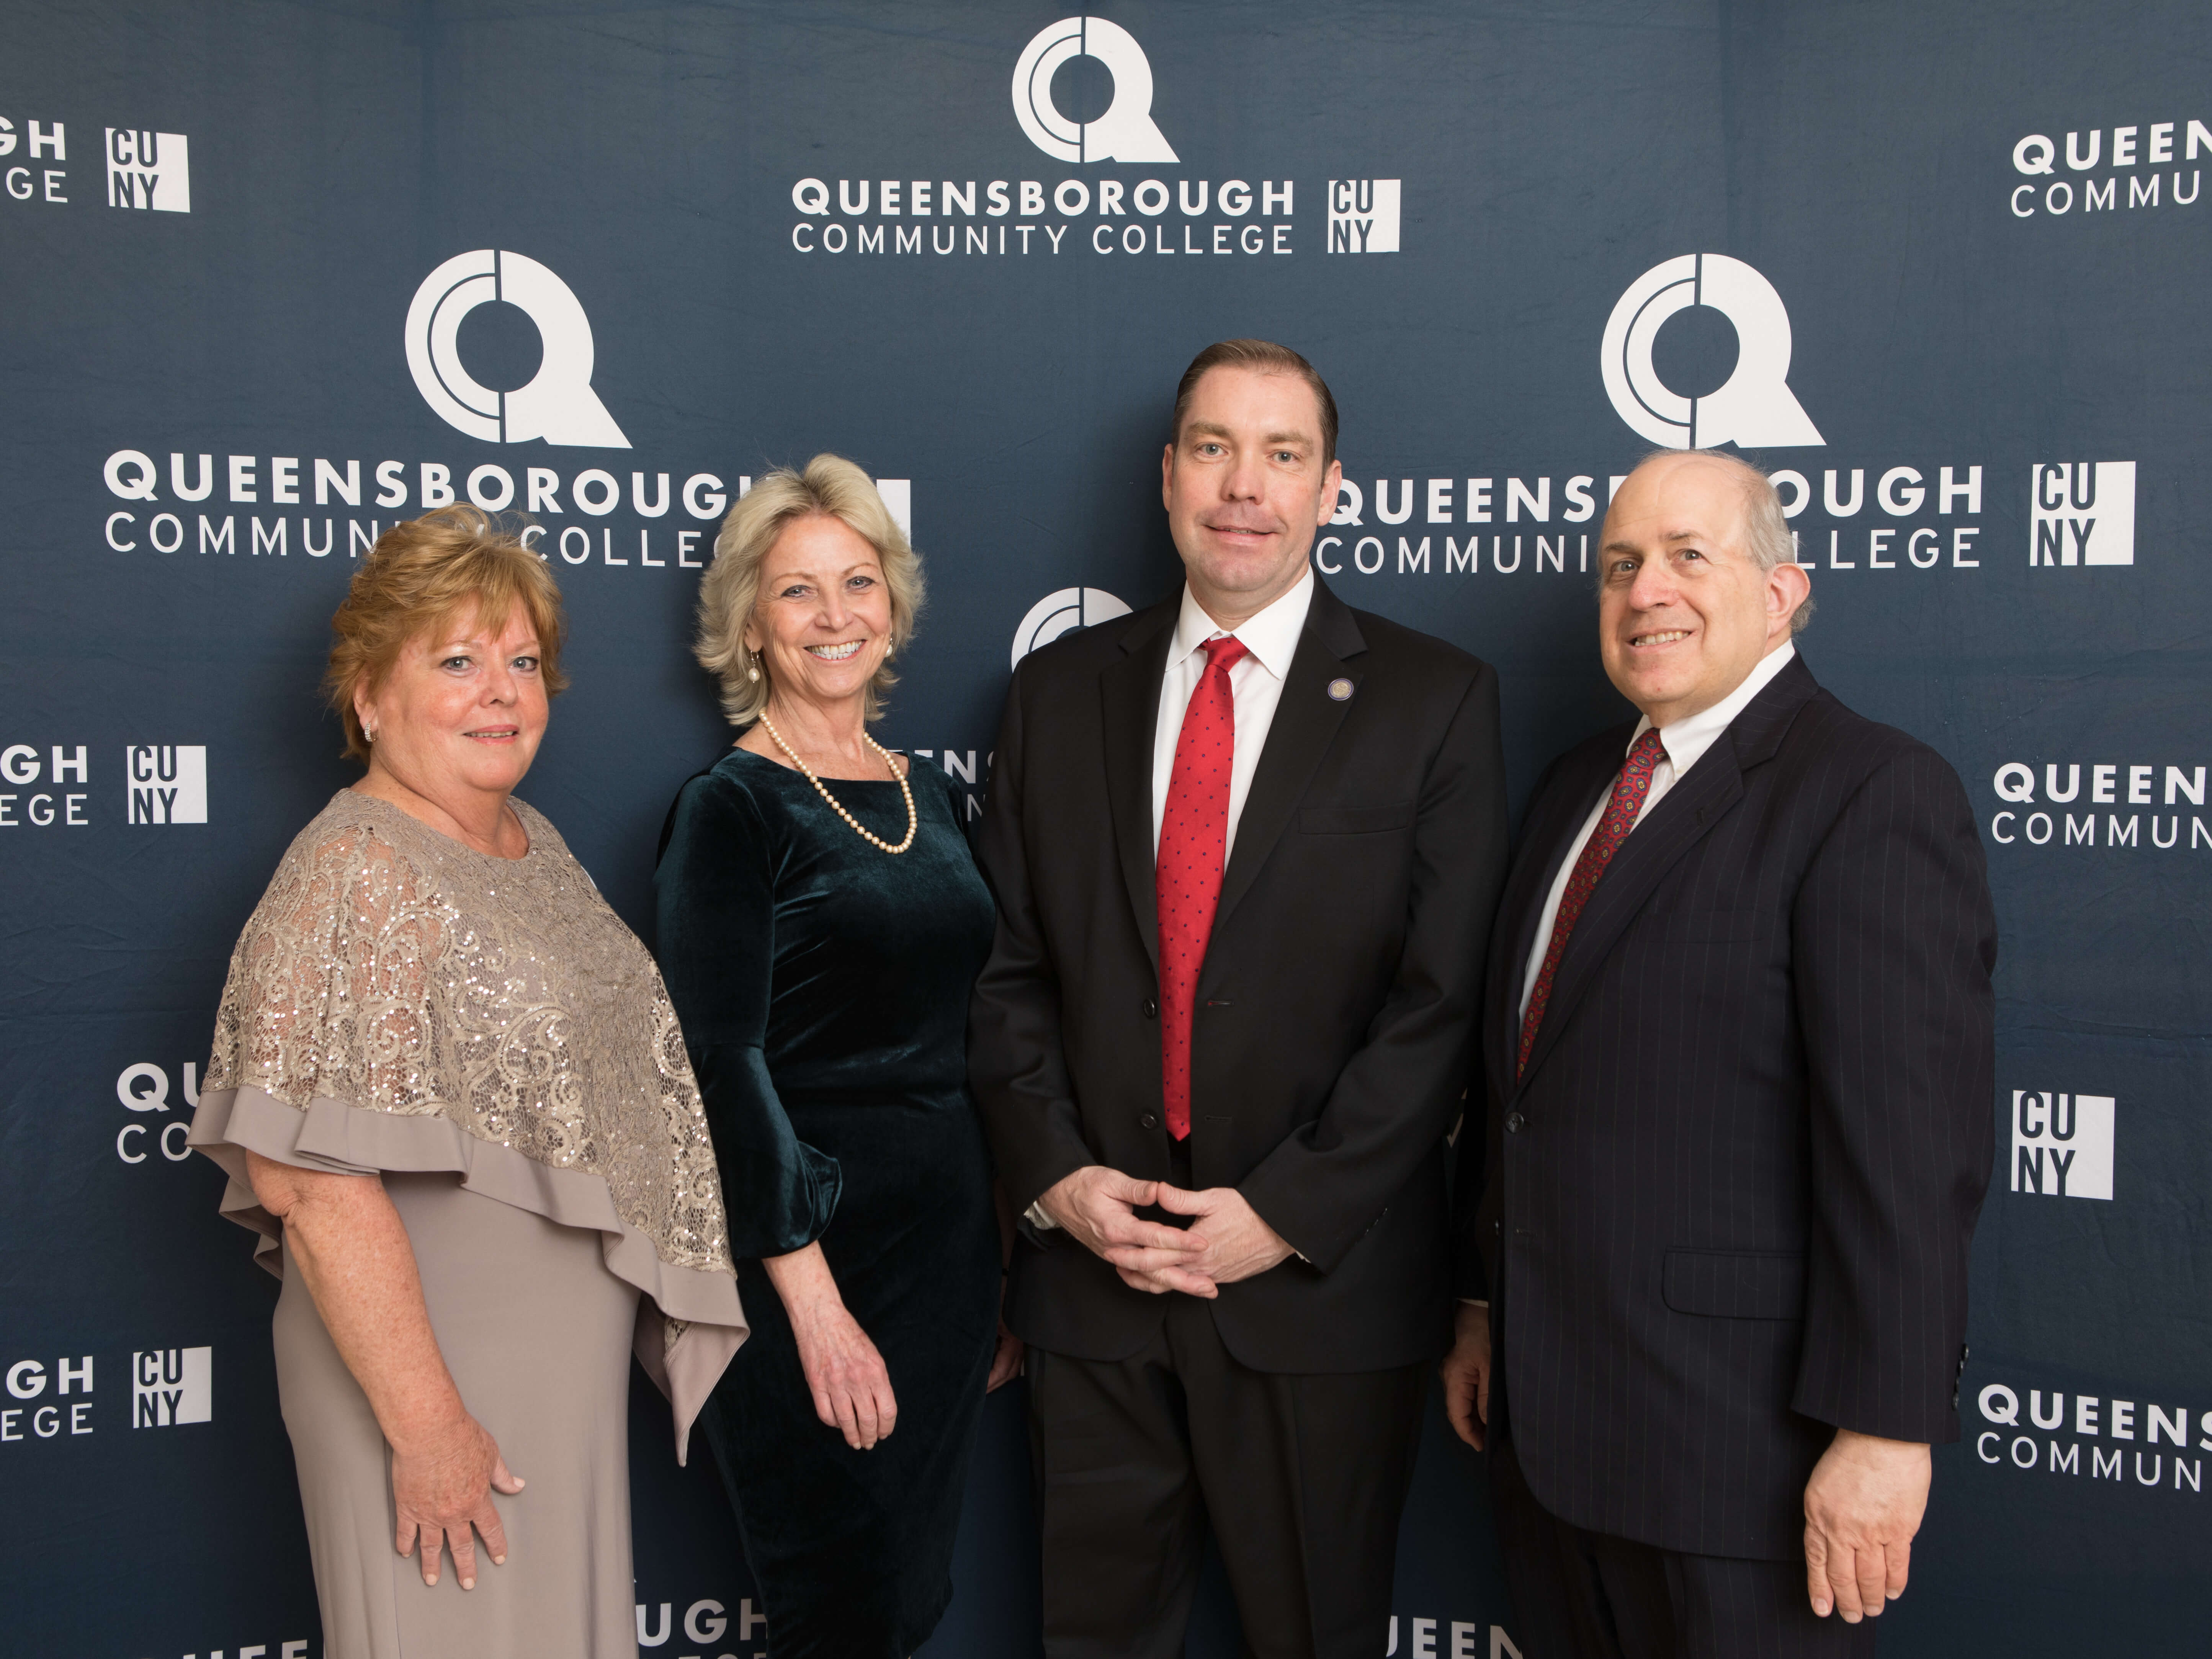 Patricia Tiffany, Gala Chair; Rosemary Sullivan Zins, Vice President, Institutional Advancement; Timothy G. Lynch, Ph.D., Interim President of Queensborough Community College; and Mark Kupferberg, Chair, QCC Fund